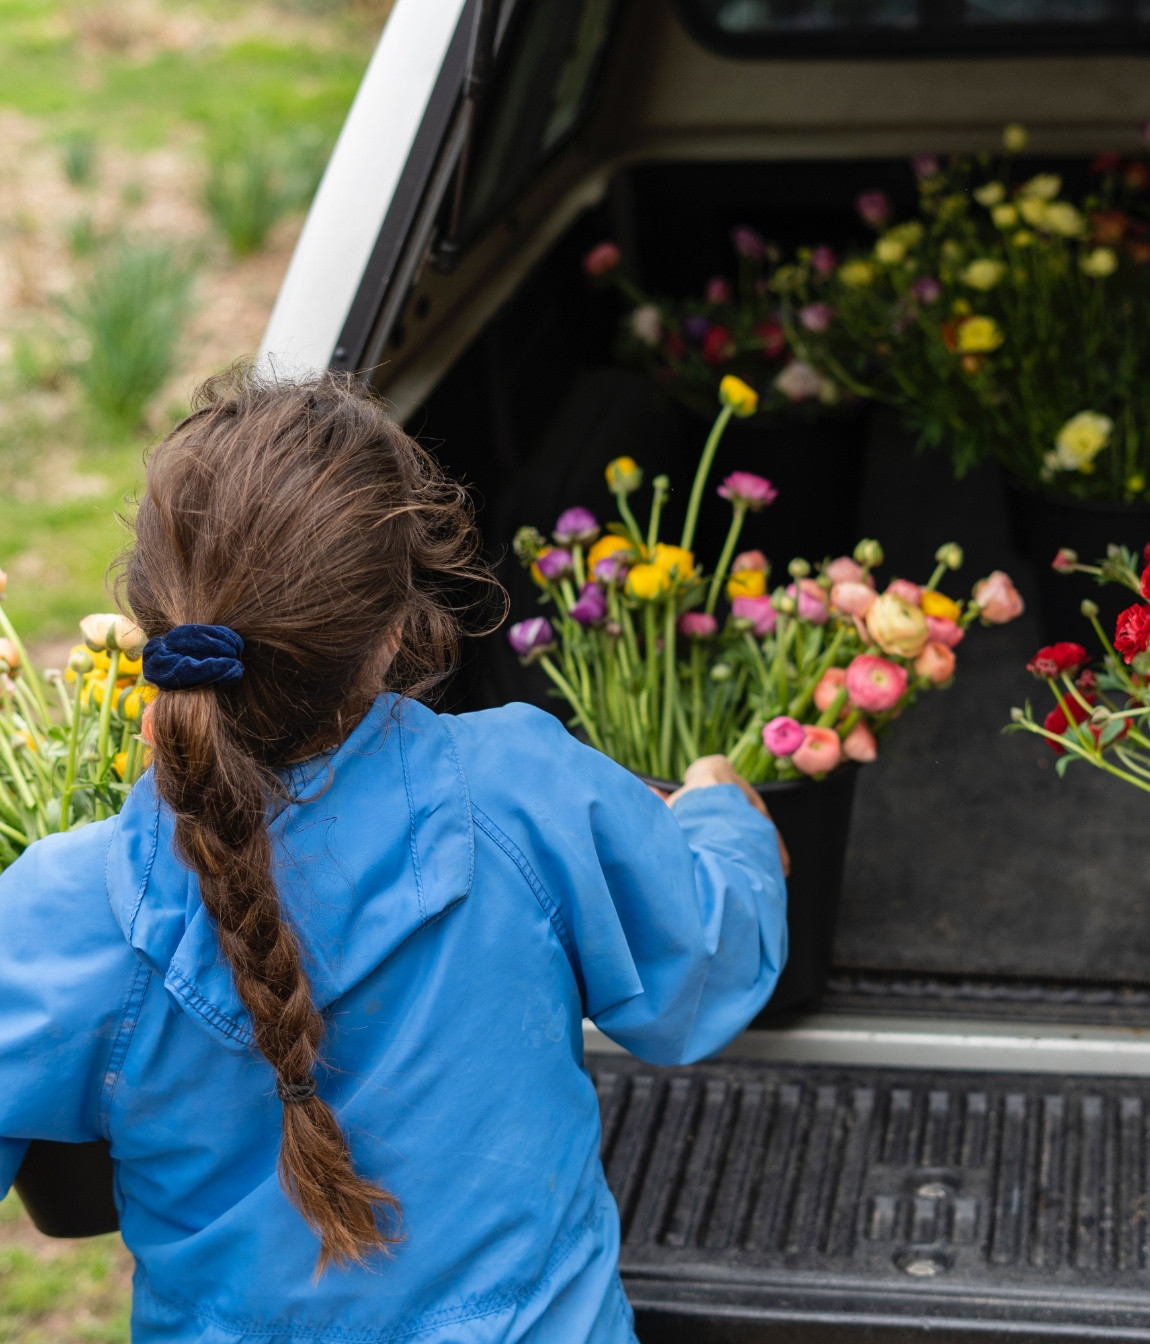 Woman loading flowers into a car